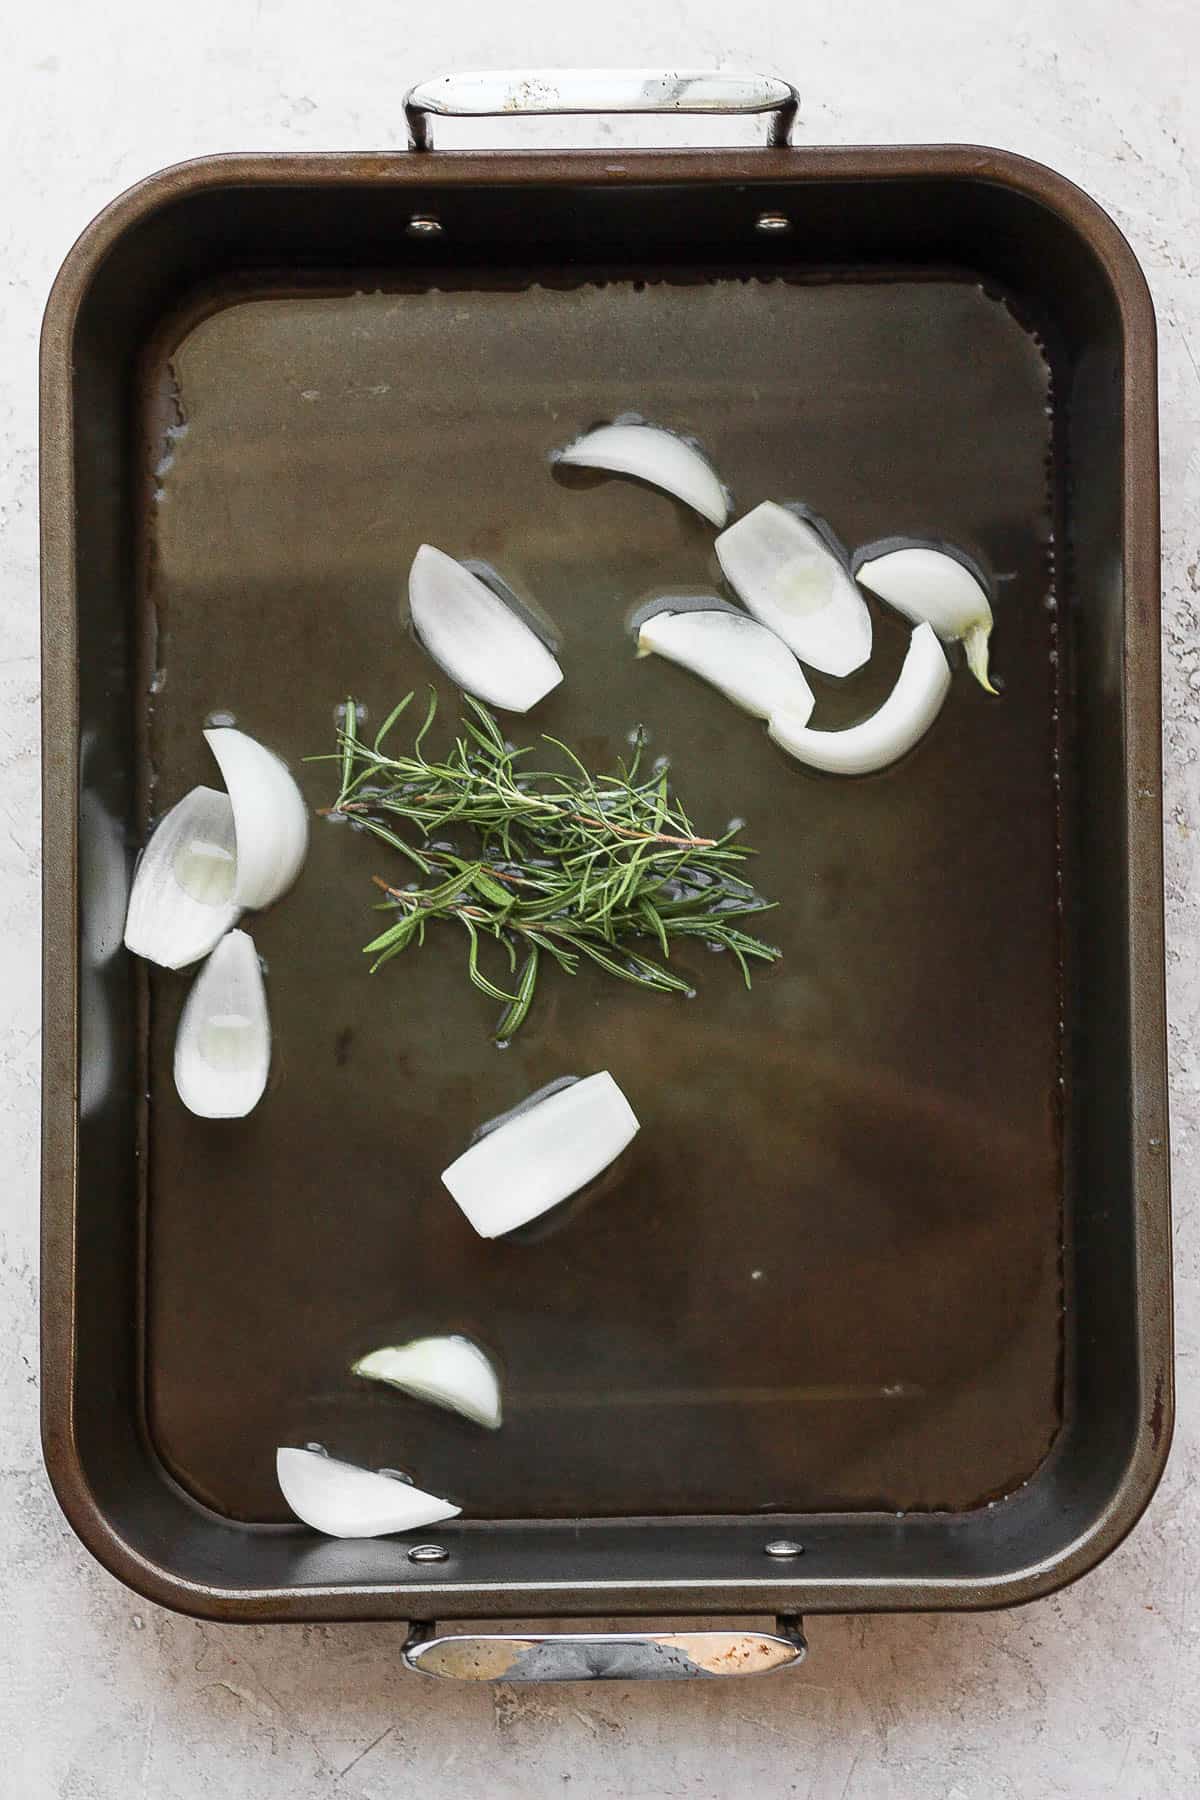 A roasting pan with chicken broth, onion, and herbs.